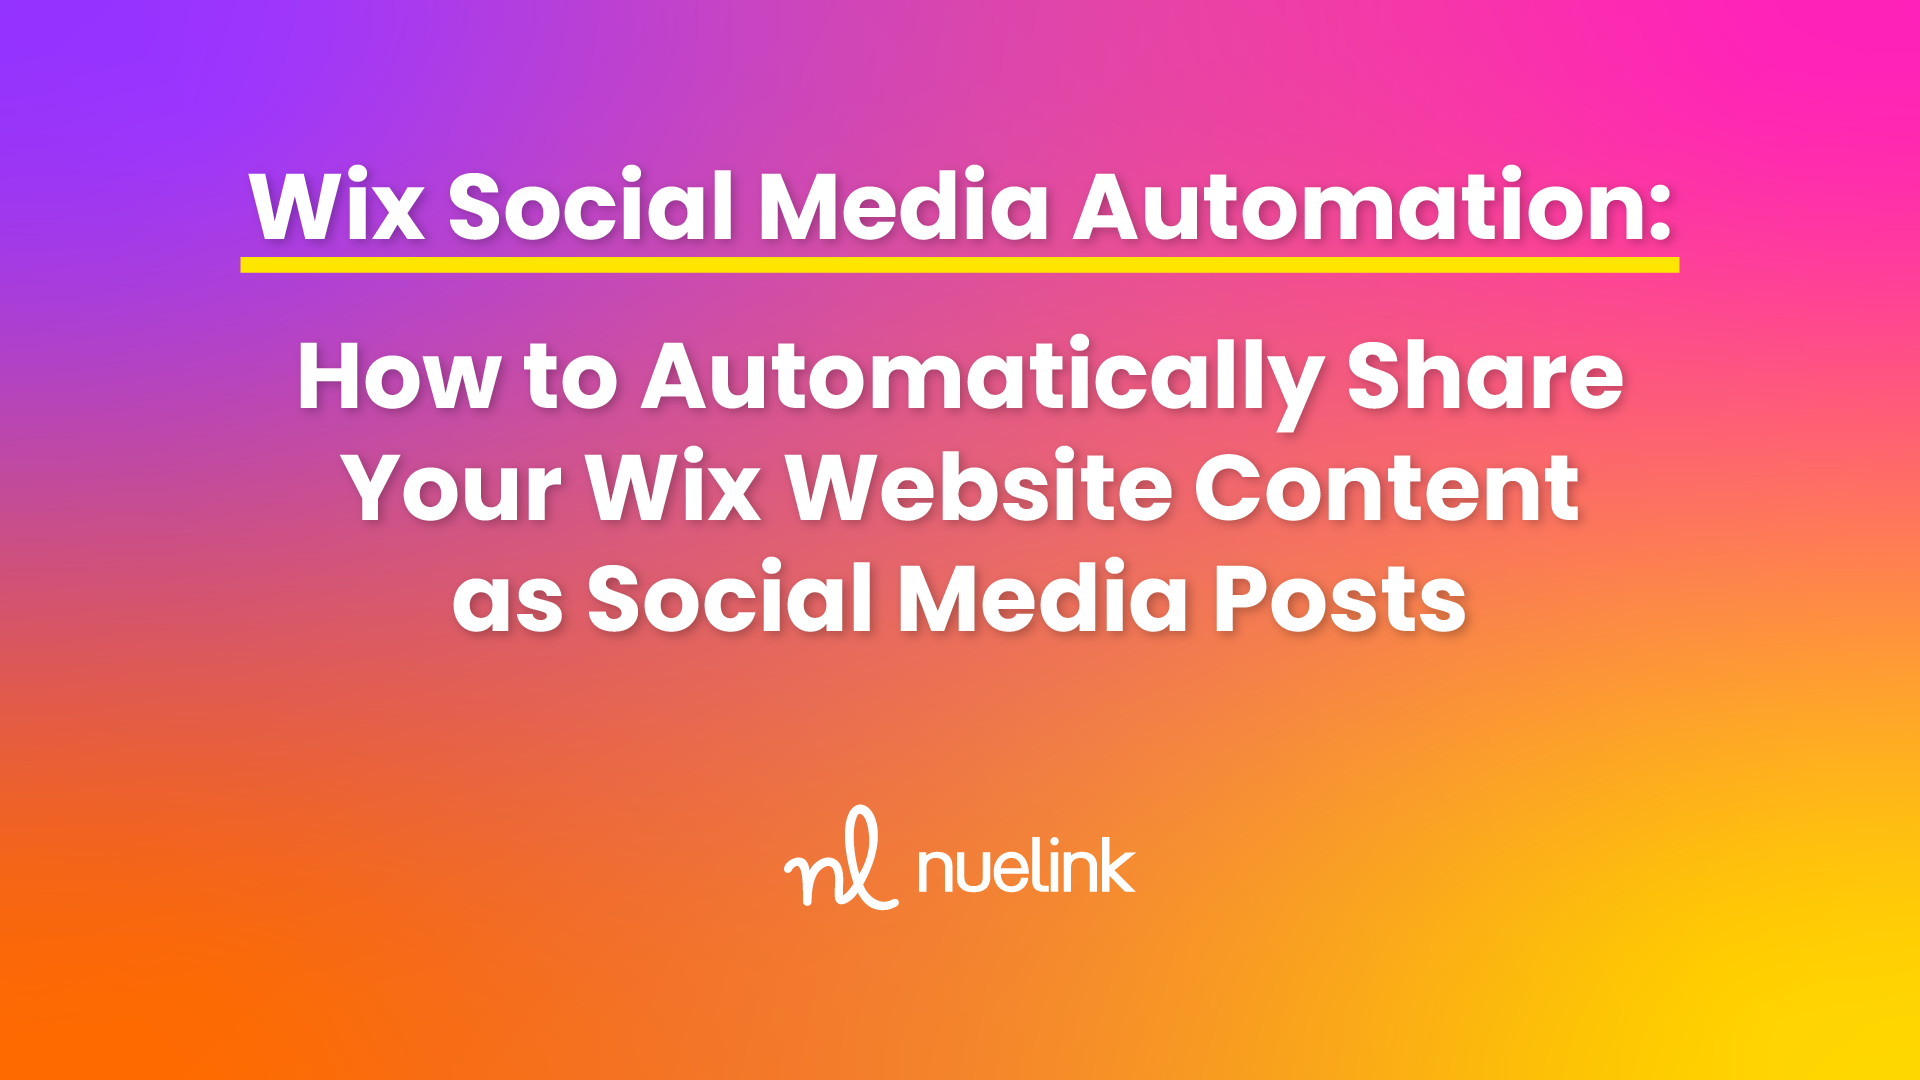 Wix Social Media Automation